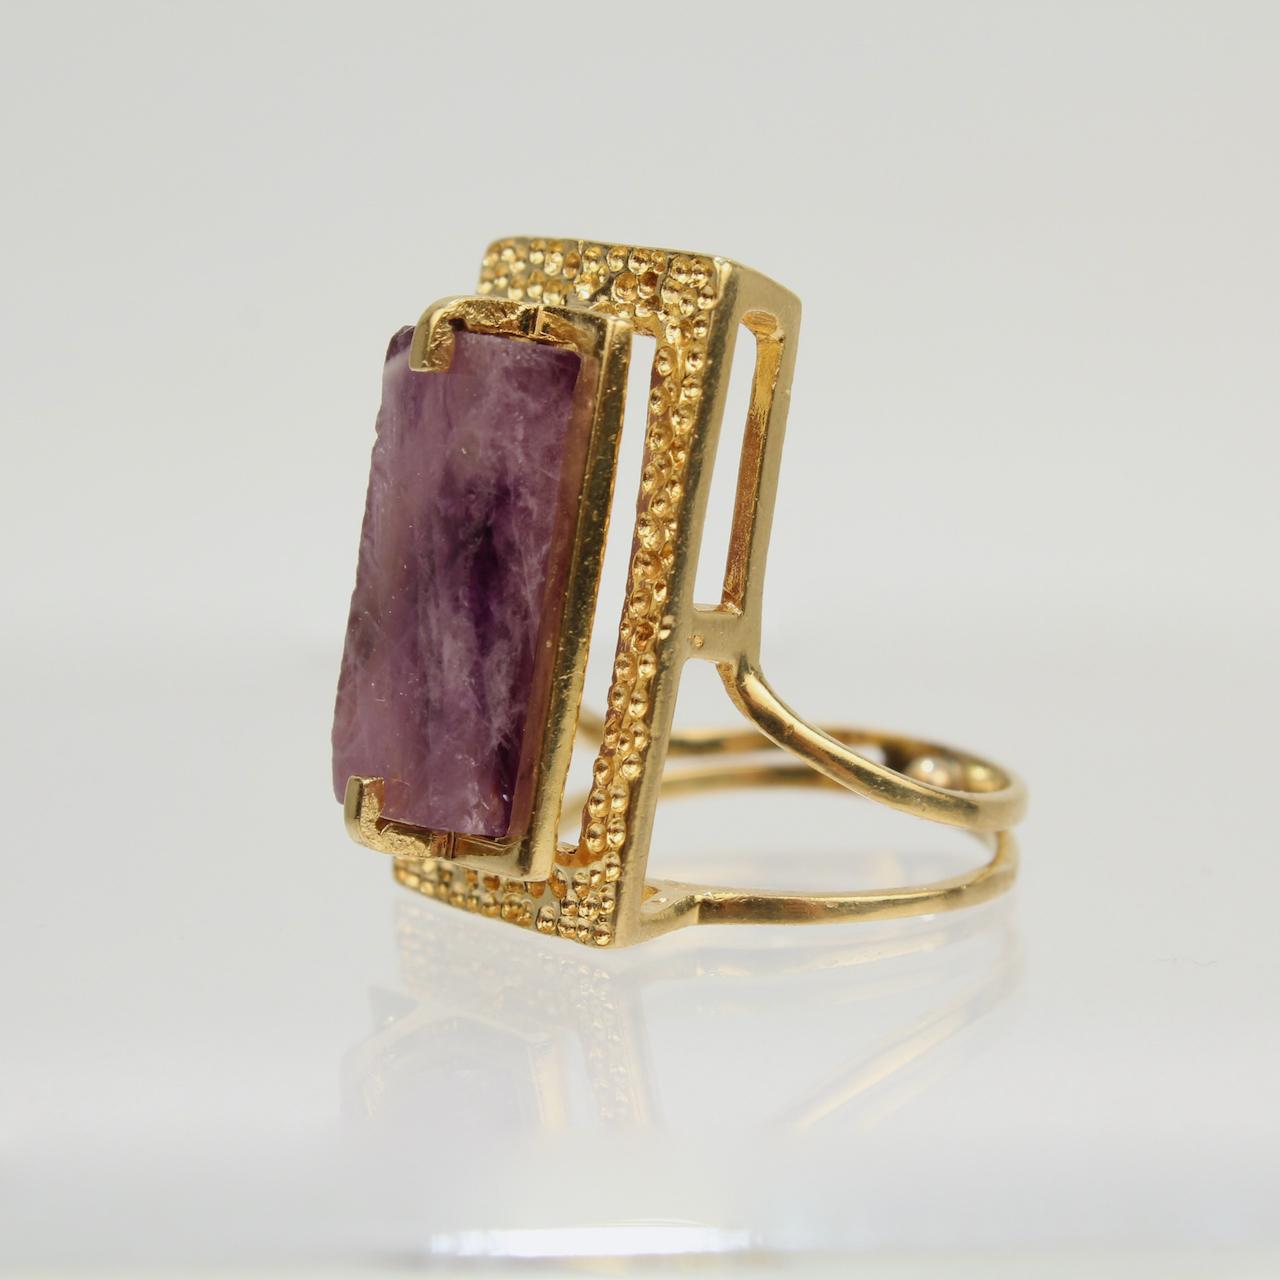 Modernist Asymmetrical 18k Gold and Rough Cut Amethyst Gemstone Cocktail Ring In Good Condition For Sale In Philadelphia, PA